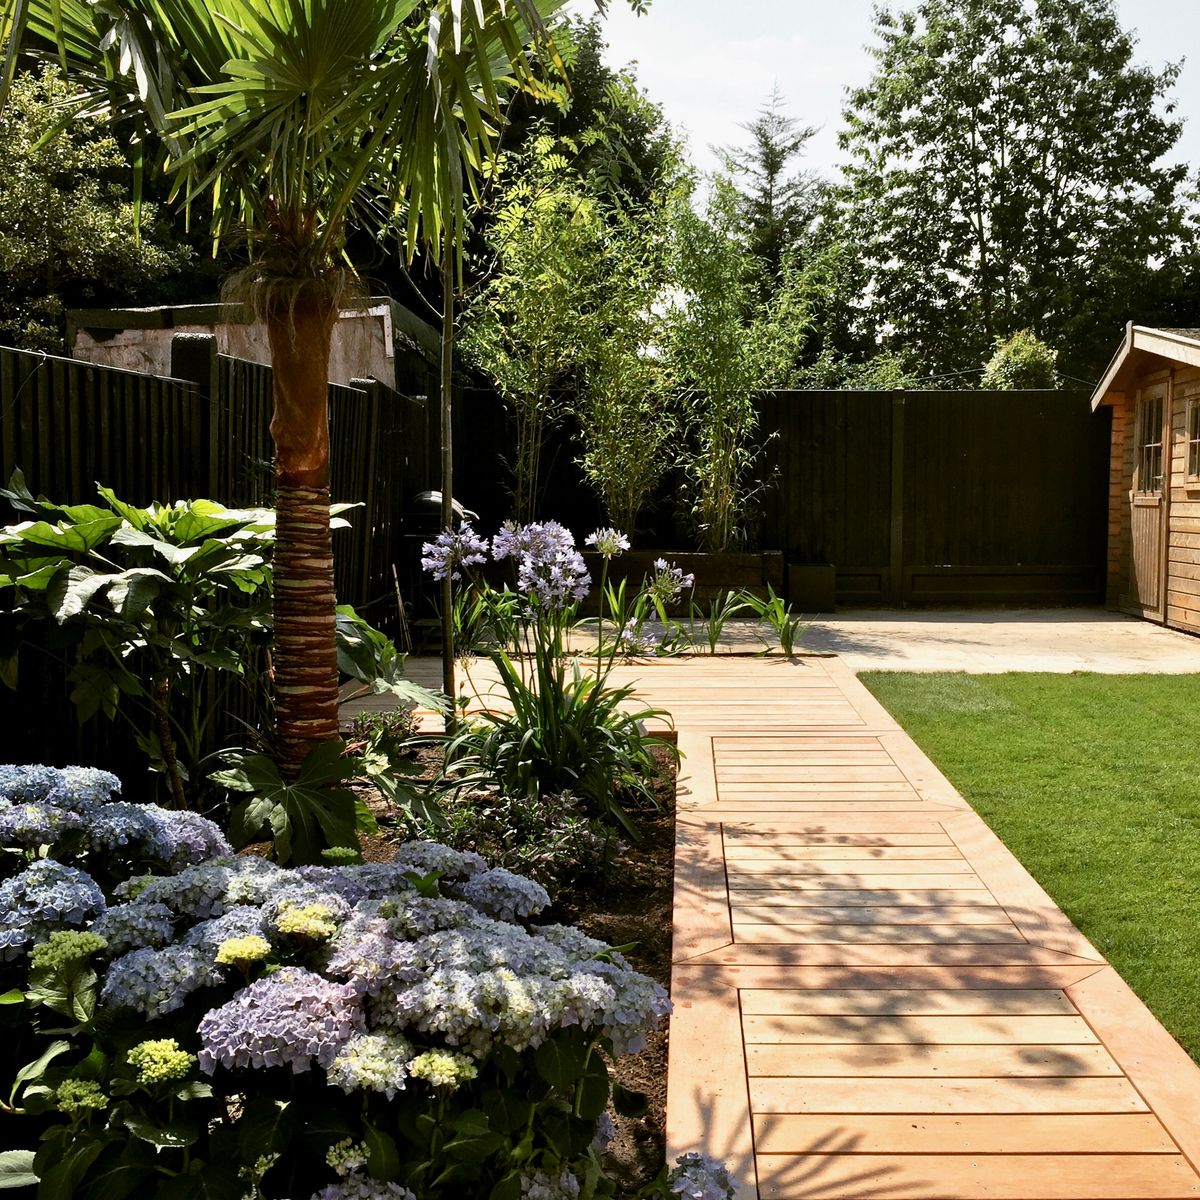 The feature planting together with several large fatsia japonica, hydrangea macrophylla, and agapanthus bring a feel of exotic luxury to the garden design